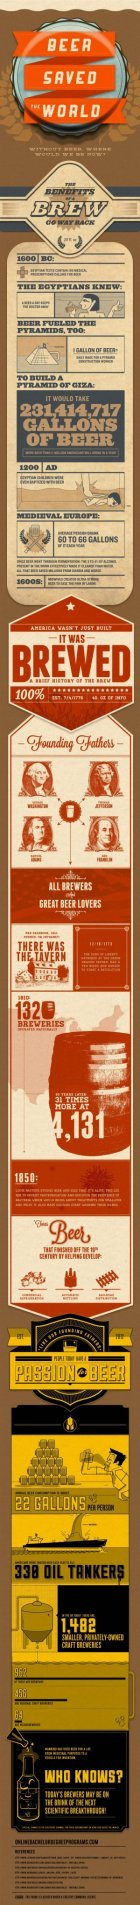 How Beer Saved The World